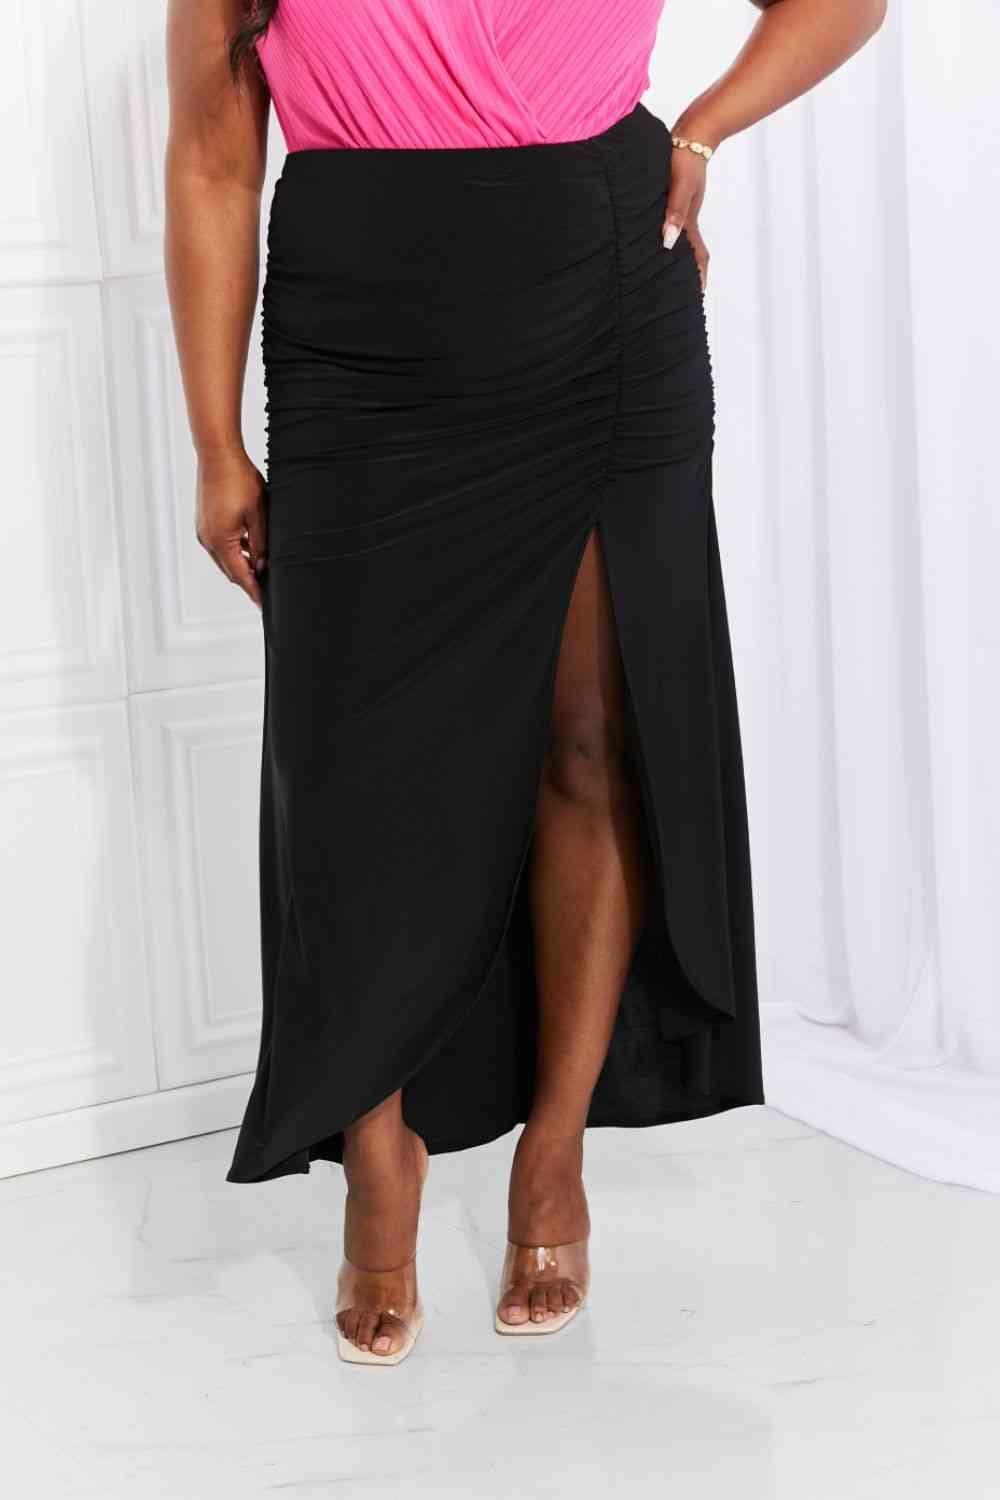 White Birch Full Size Up and Up Ruched Slit Maxi Skirt in Black Black / S